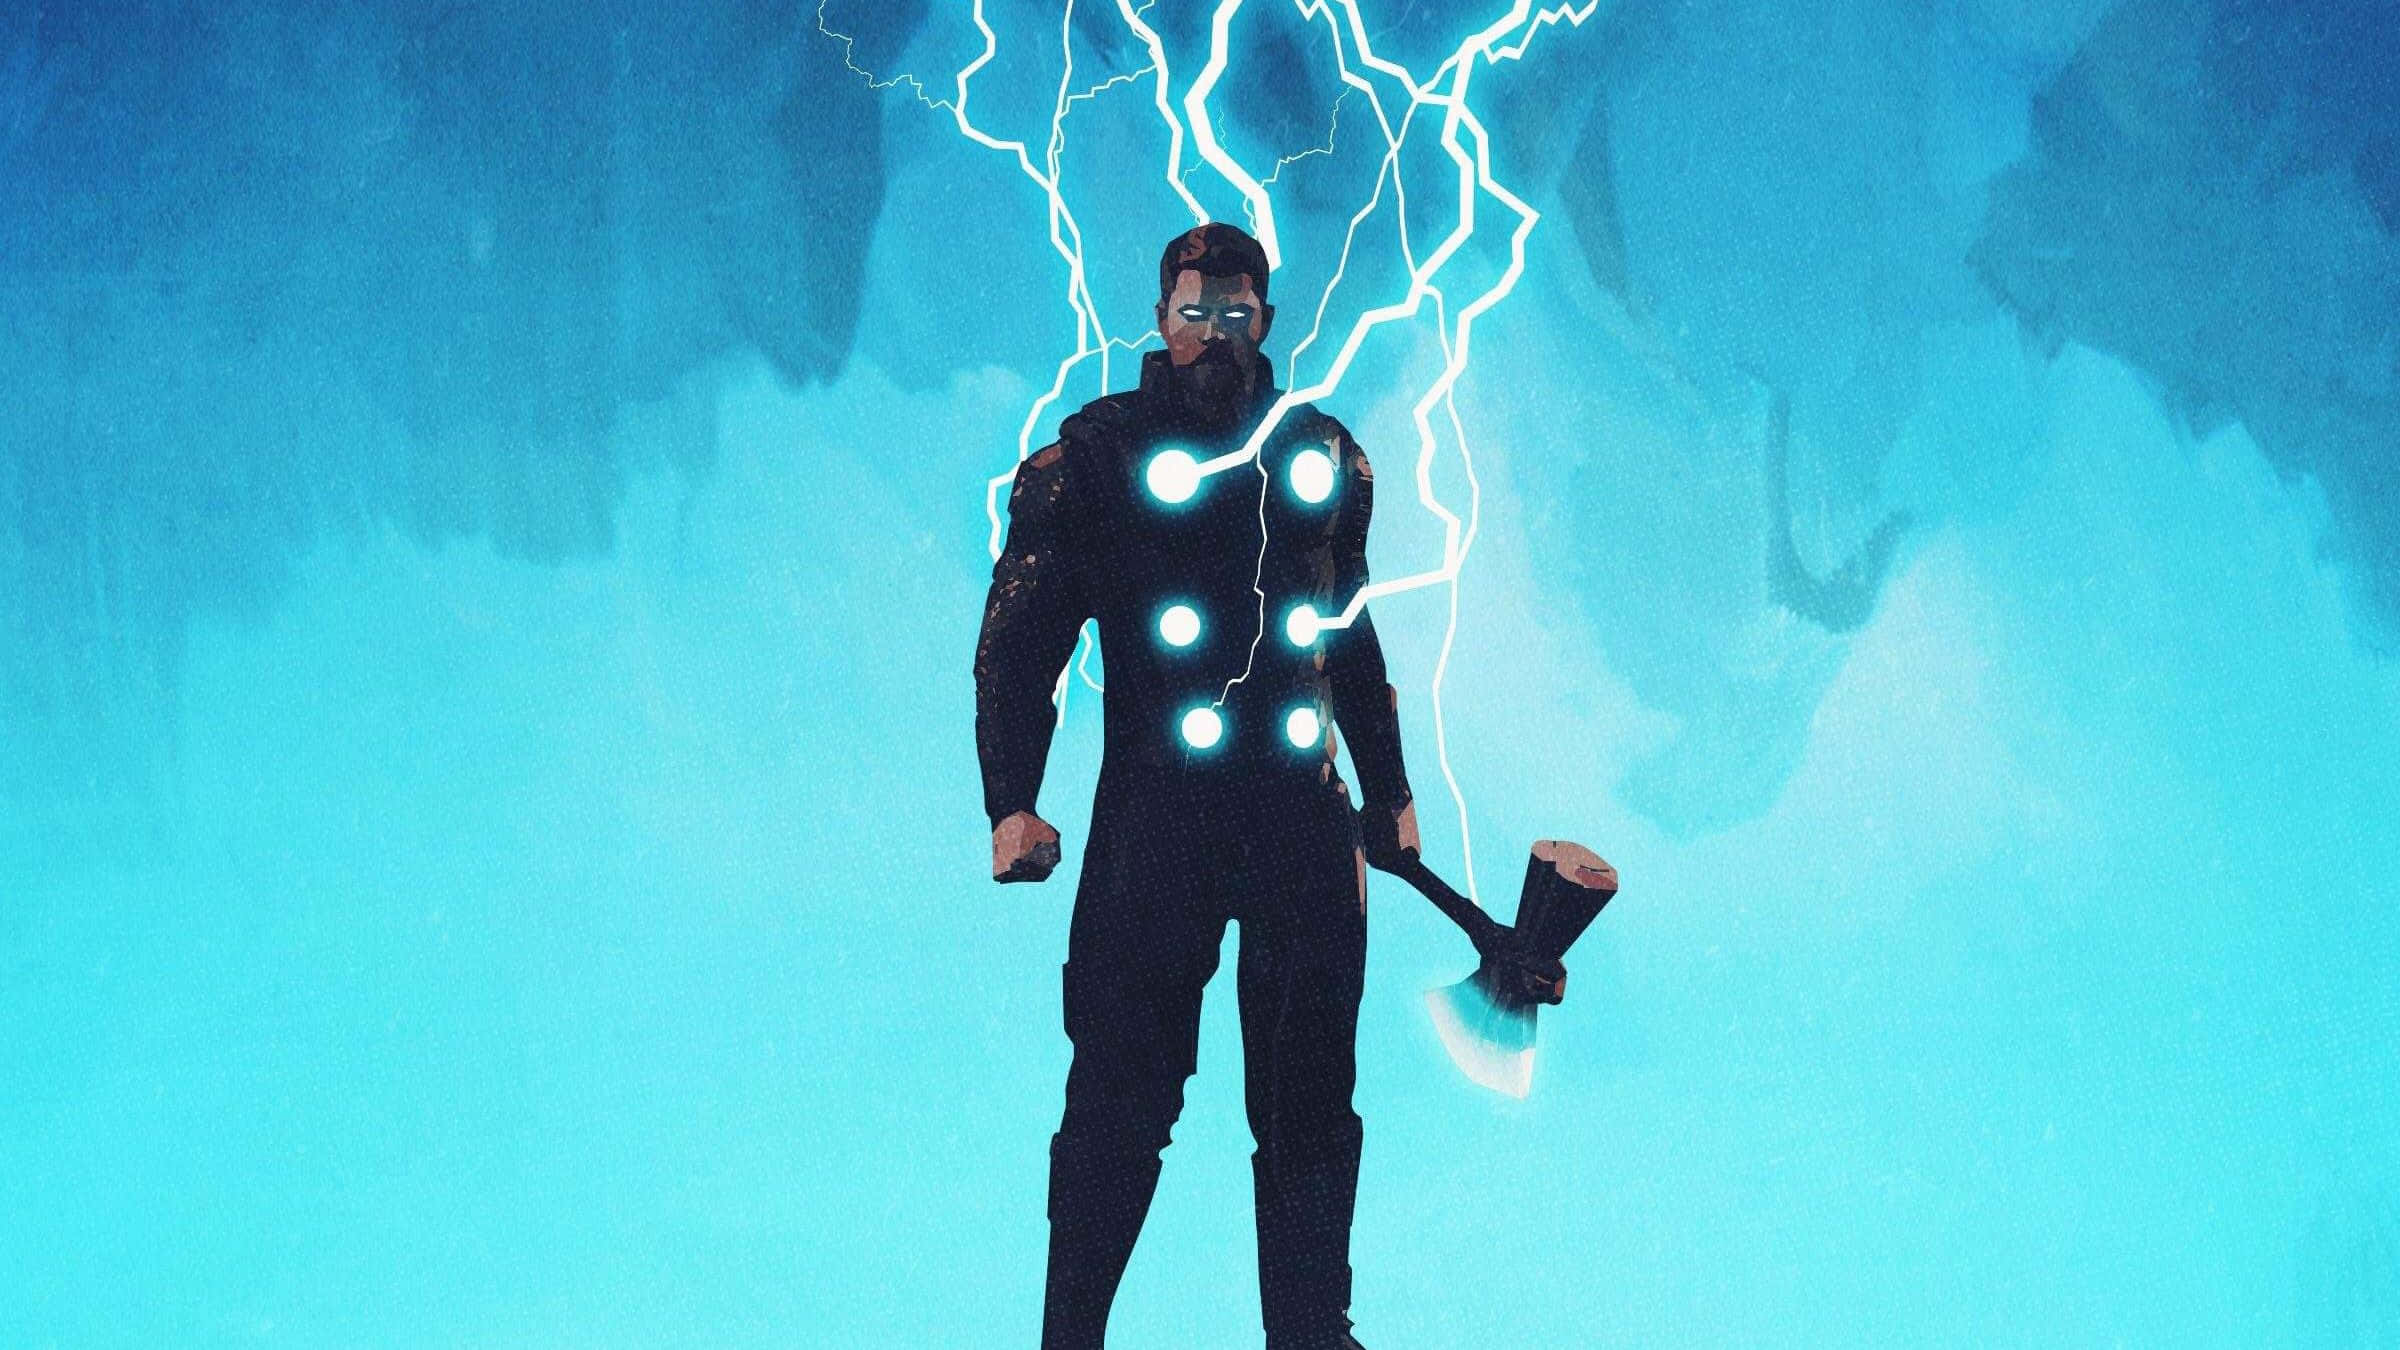 God of Thunder, The All-Powerful Wallpaper